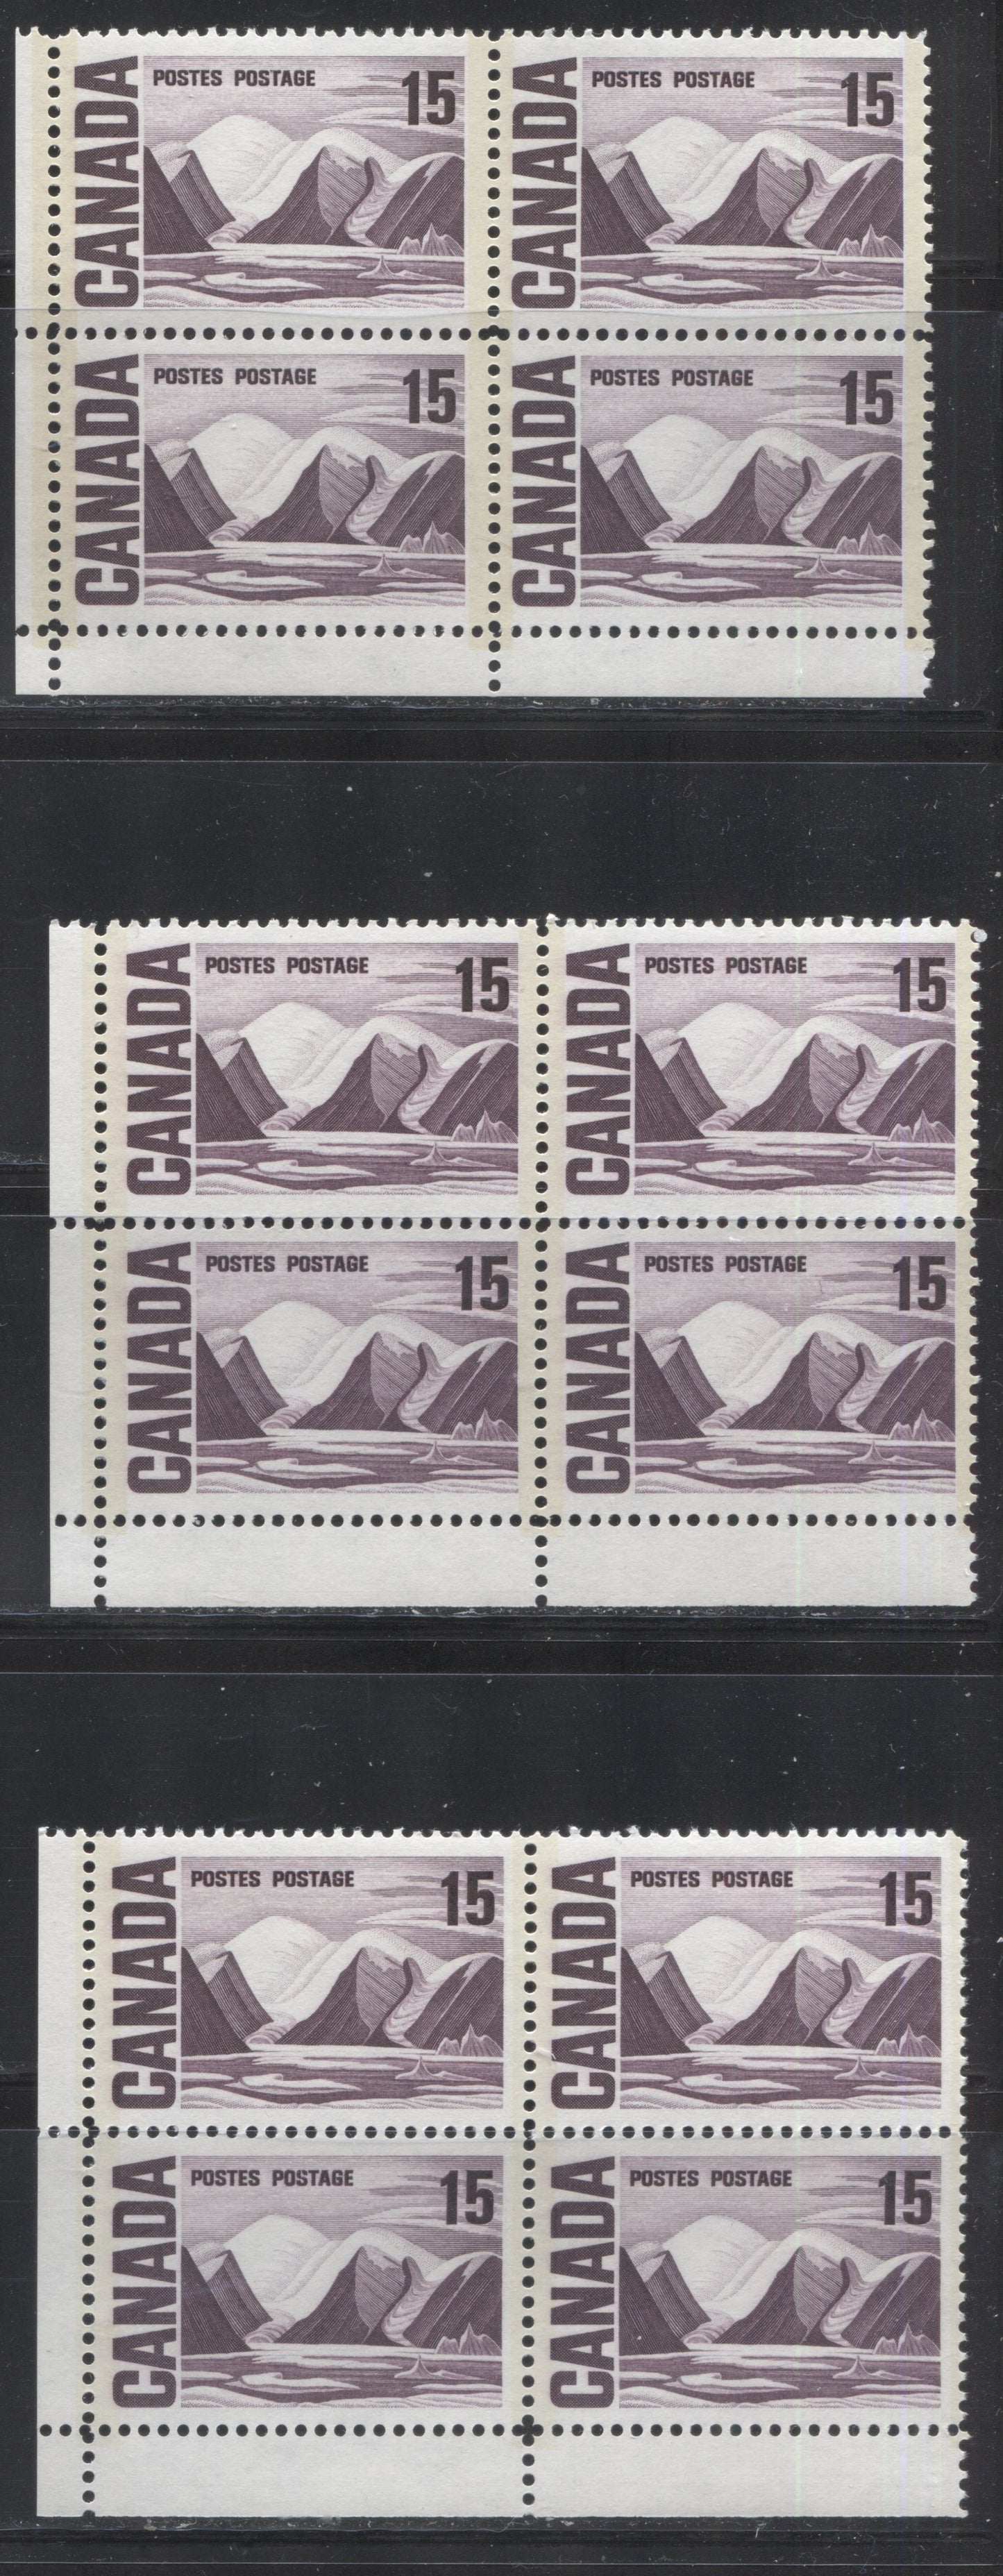 Lot 63 Canada #463piv 15c Deep & Bright Rose Lilacs And Dull Reddish Lilac Greenland Mountains, 1967-1973 Centennial Definitive Issue, Three VFNH LL GT2 Tagged Field Stock Blocks Of 4 On LF-fl Papers With Satin & Eggshell PVA Gums